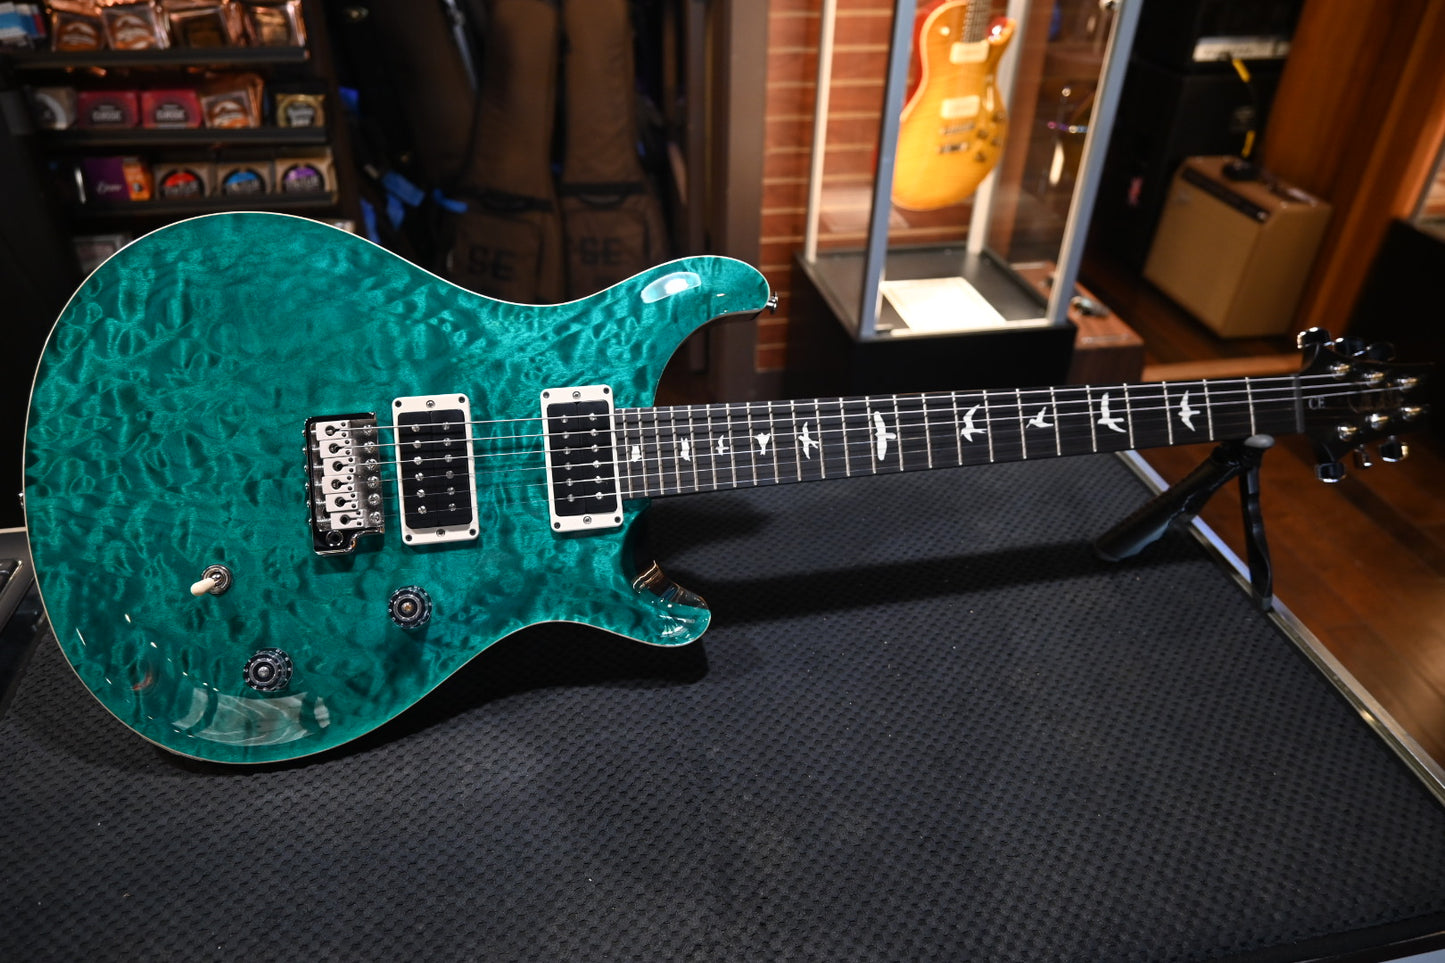 PRS Wood Library CE 24 Quilt - Turquoise Guitar #2089 - Danville Music